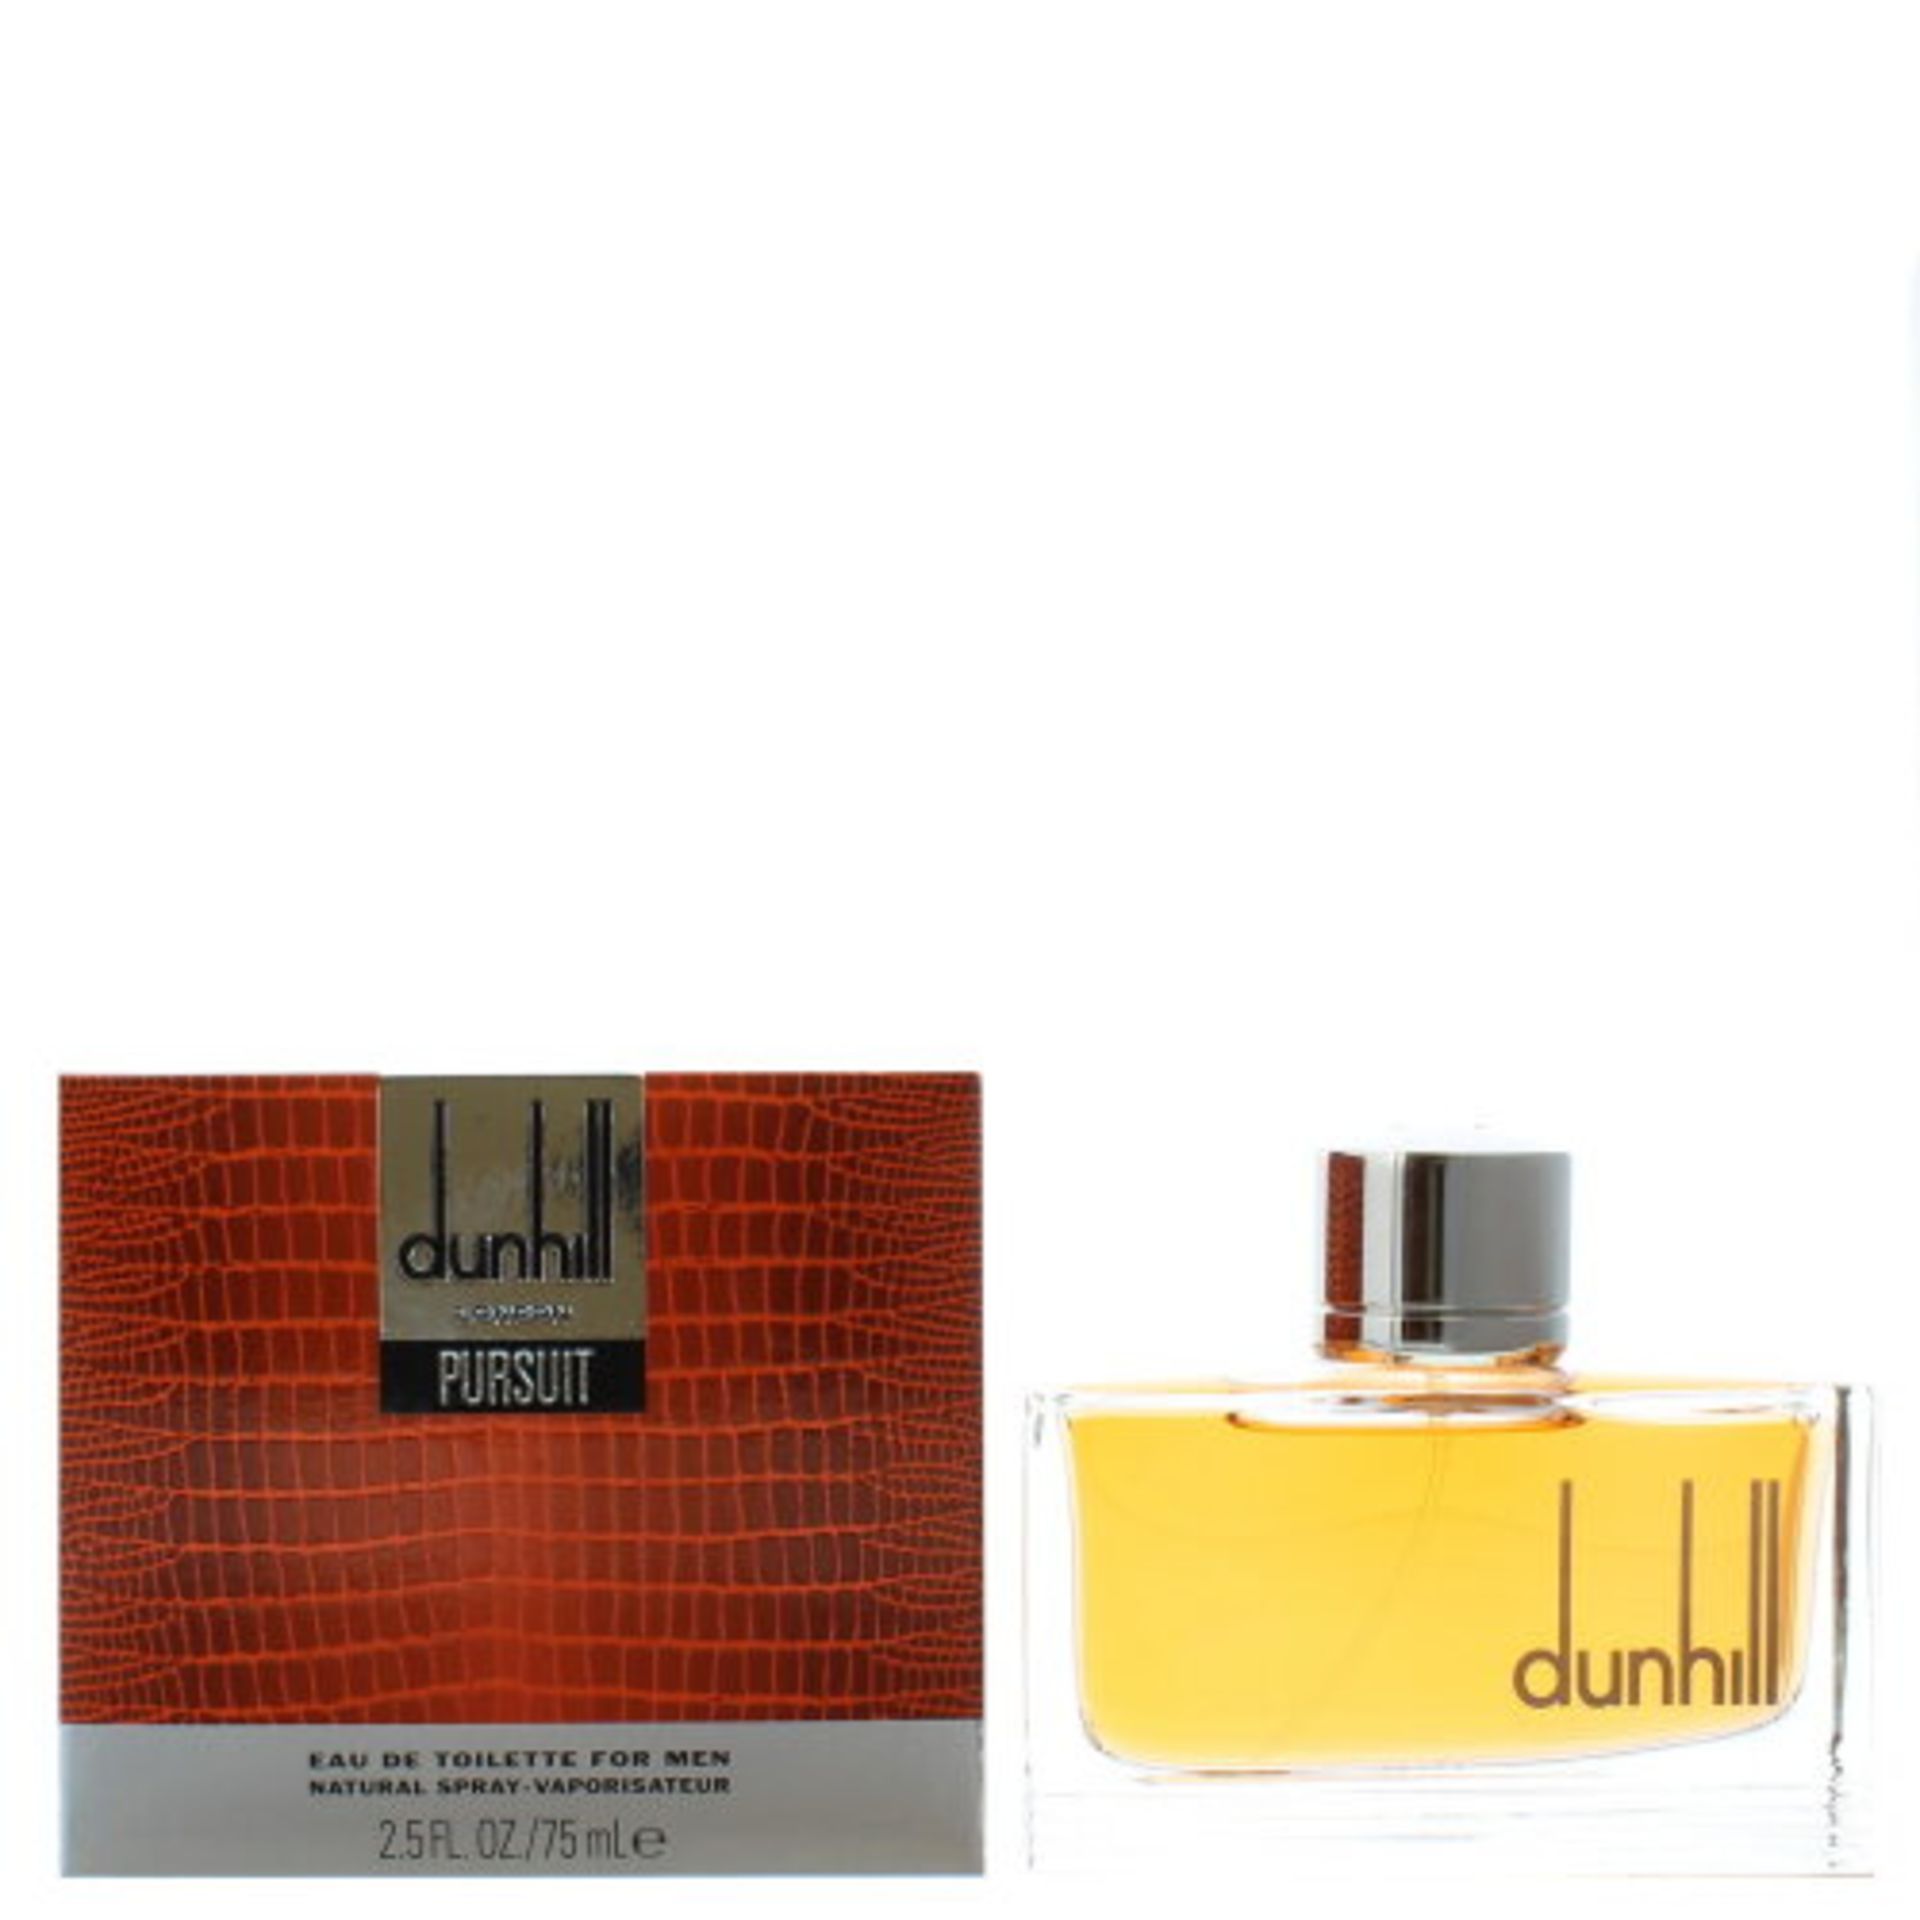 DUNHILL AFTERSHAVE